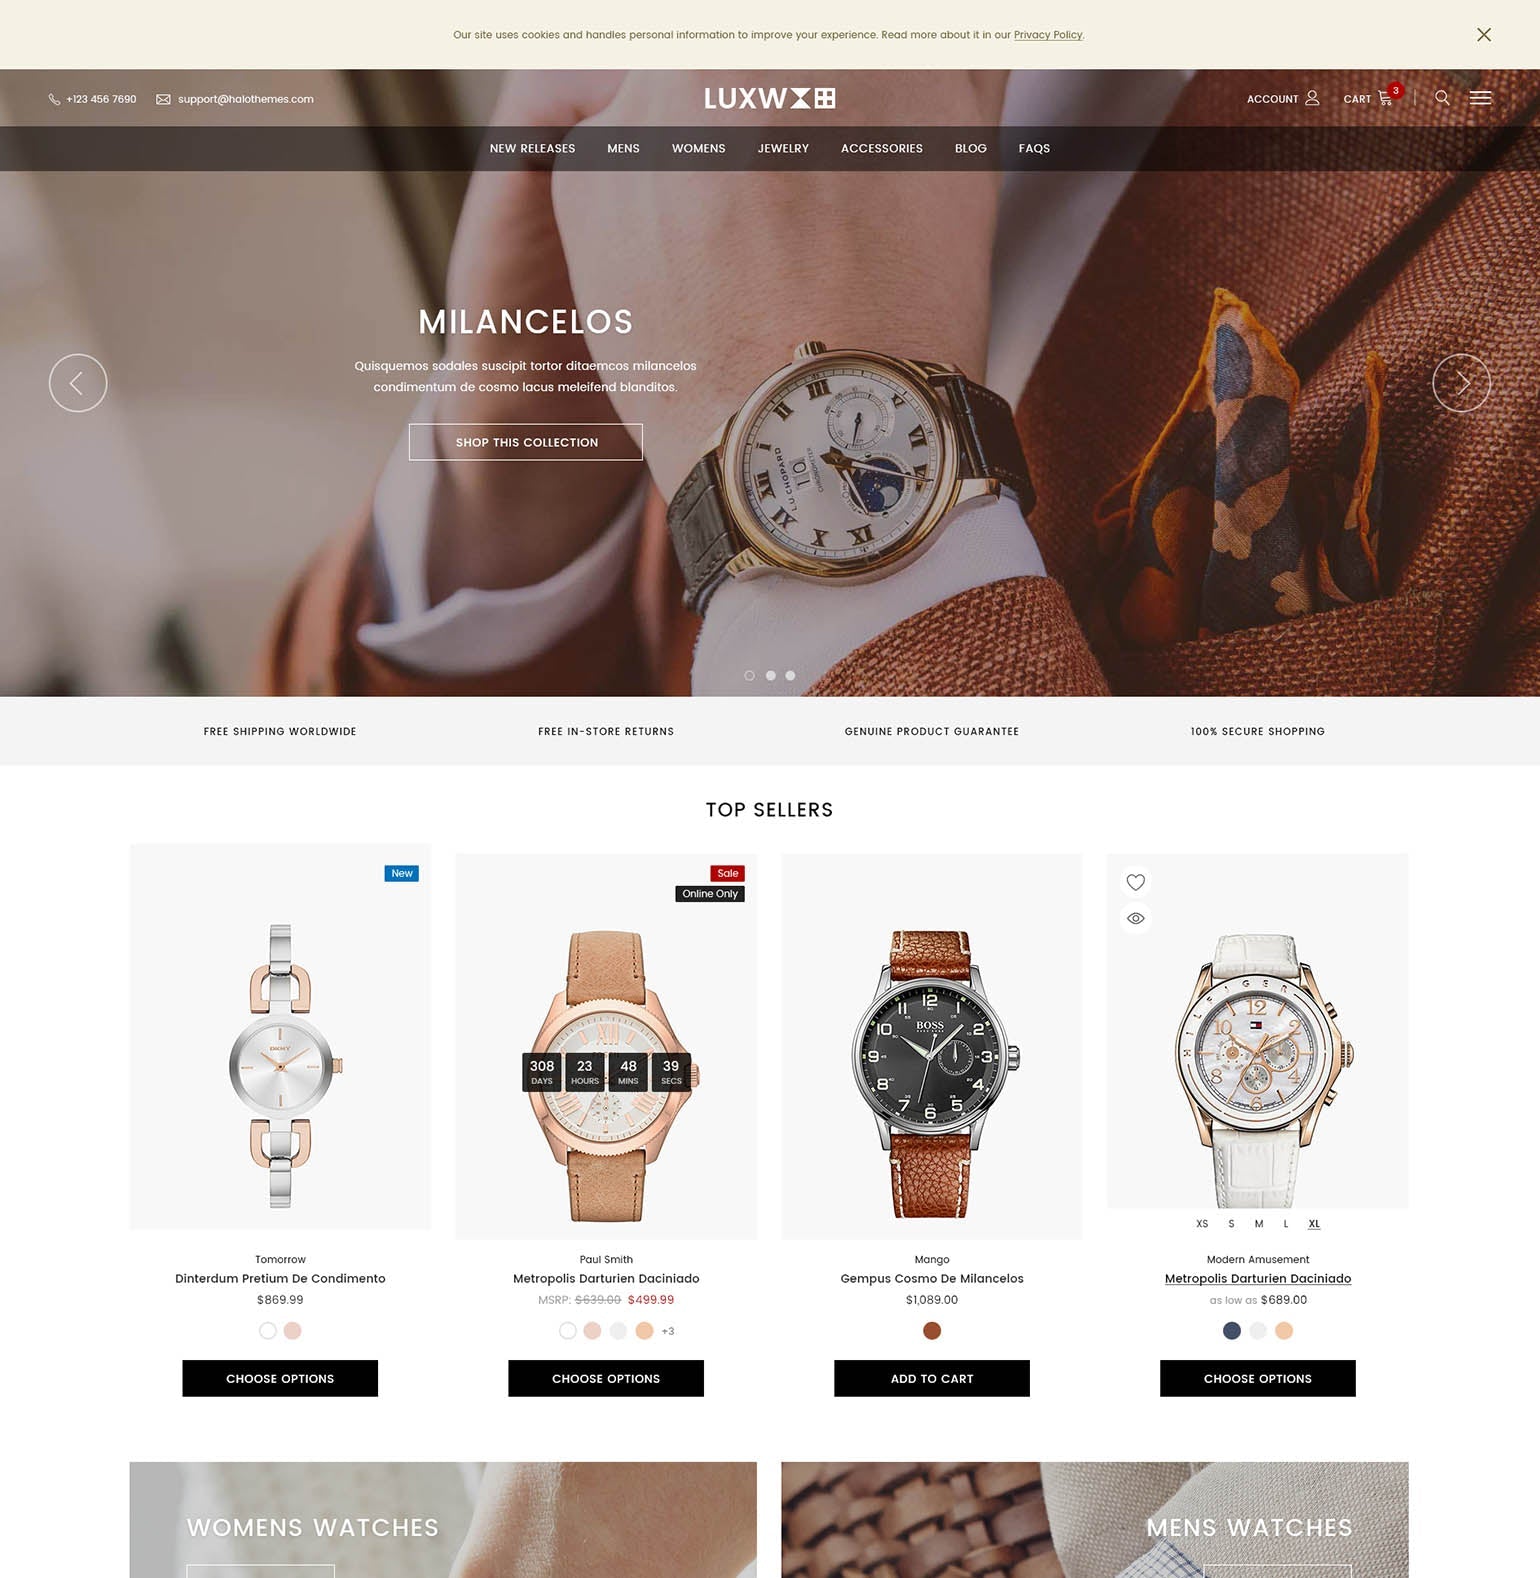 Luxury Watch and Accessories - Ecommerce Website Template